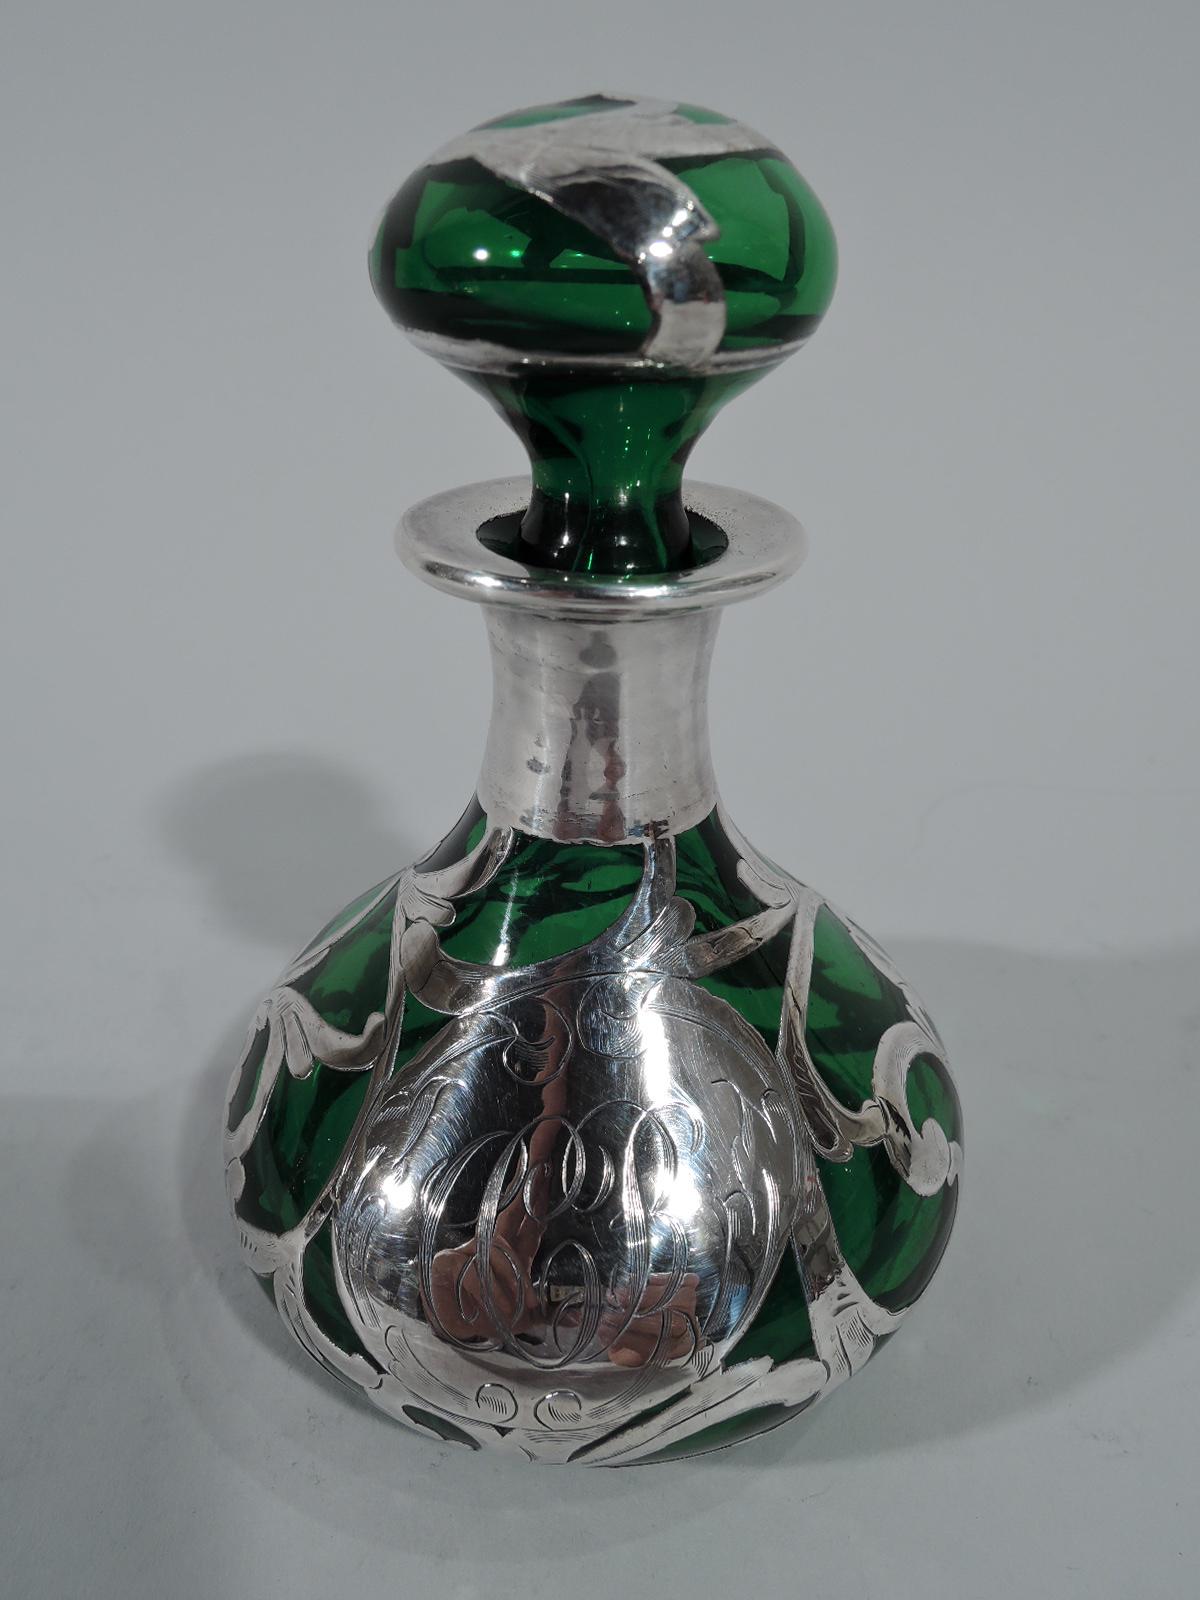 Art Nouveau emerald glass perfume with silver overlay. Bellied bowl and everted rim. Squashed ball stopper with short plug. Engraved overlay in form of scrolled and interlaced tendrils. Scrolled cartouche engraved with script monogram. Faint mark.